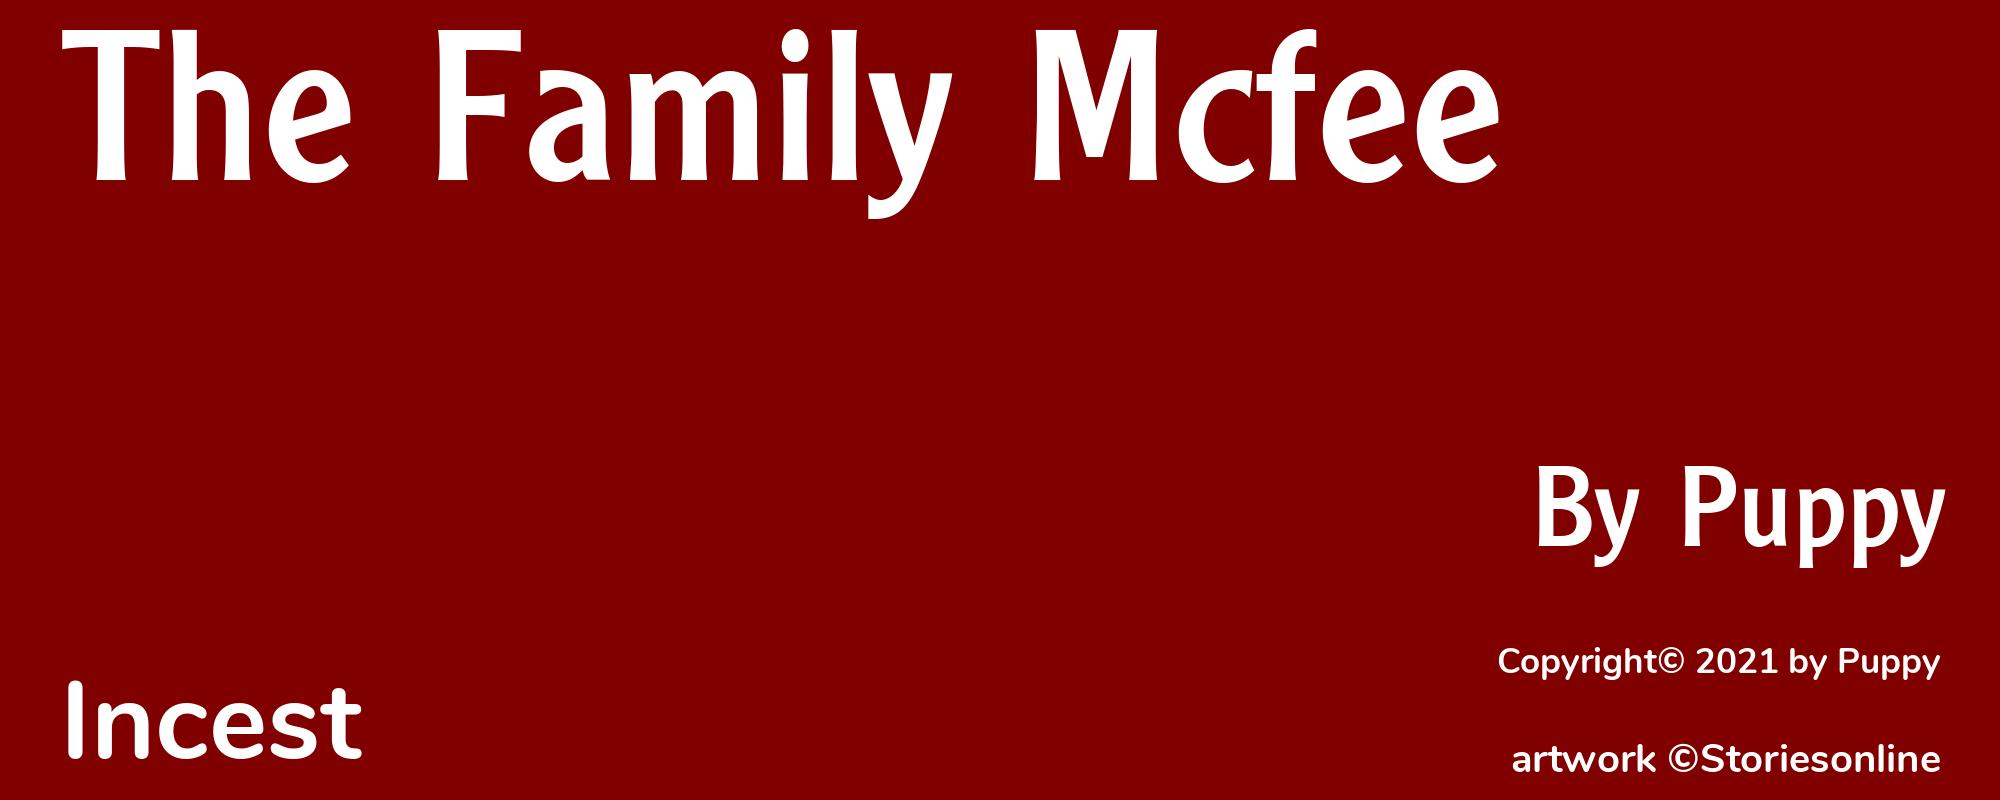 The Family Mcfee - Cover